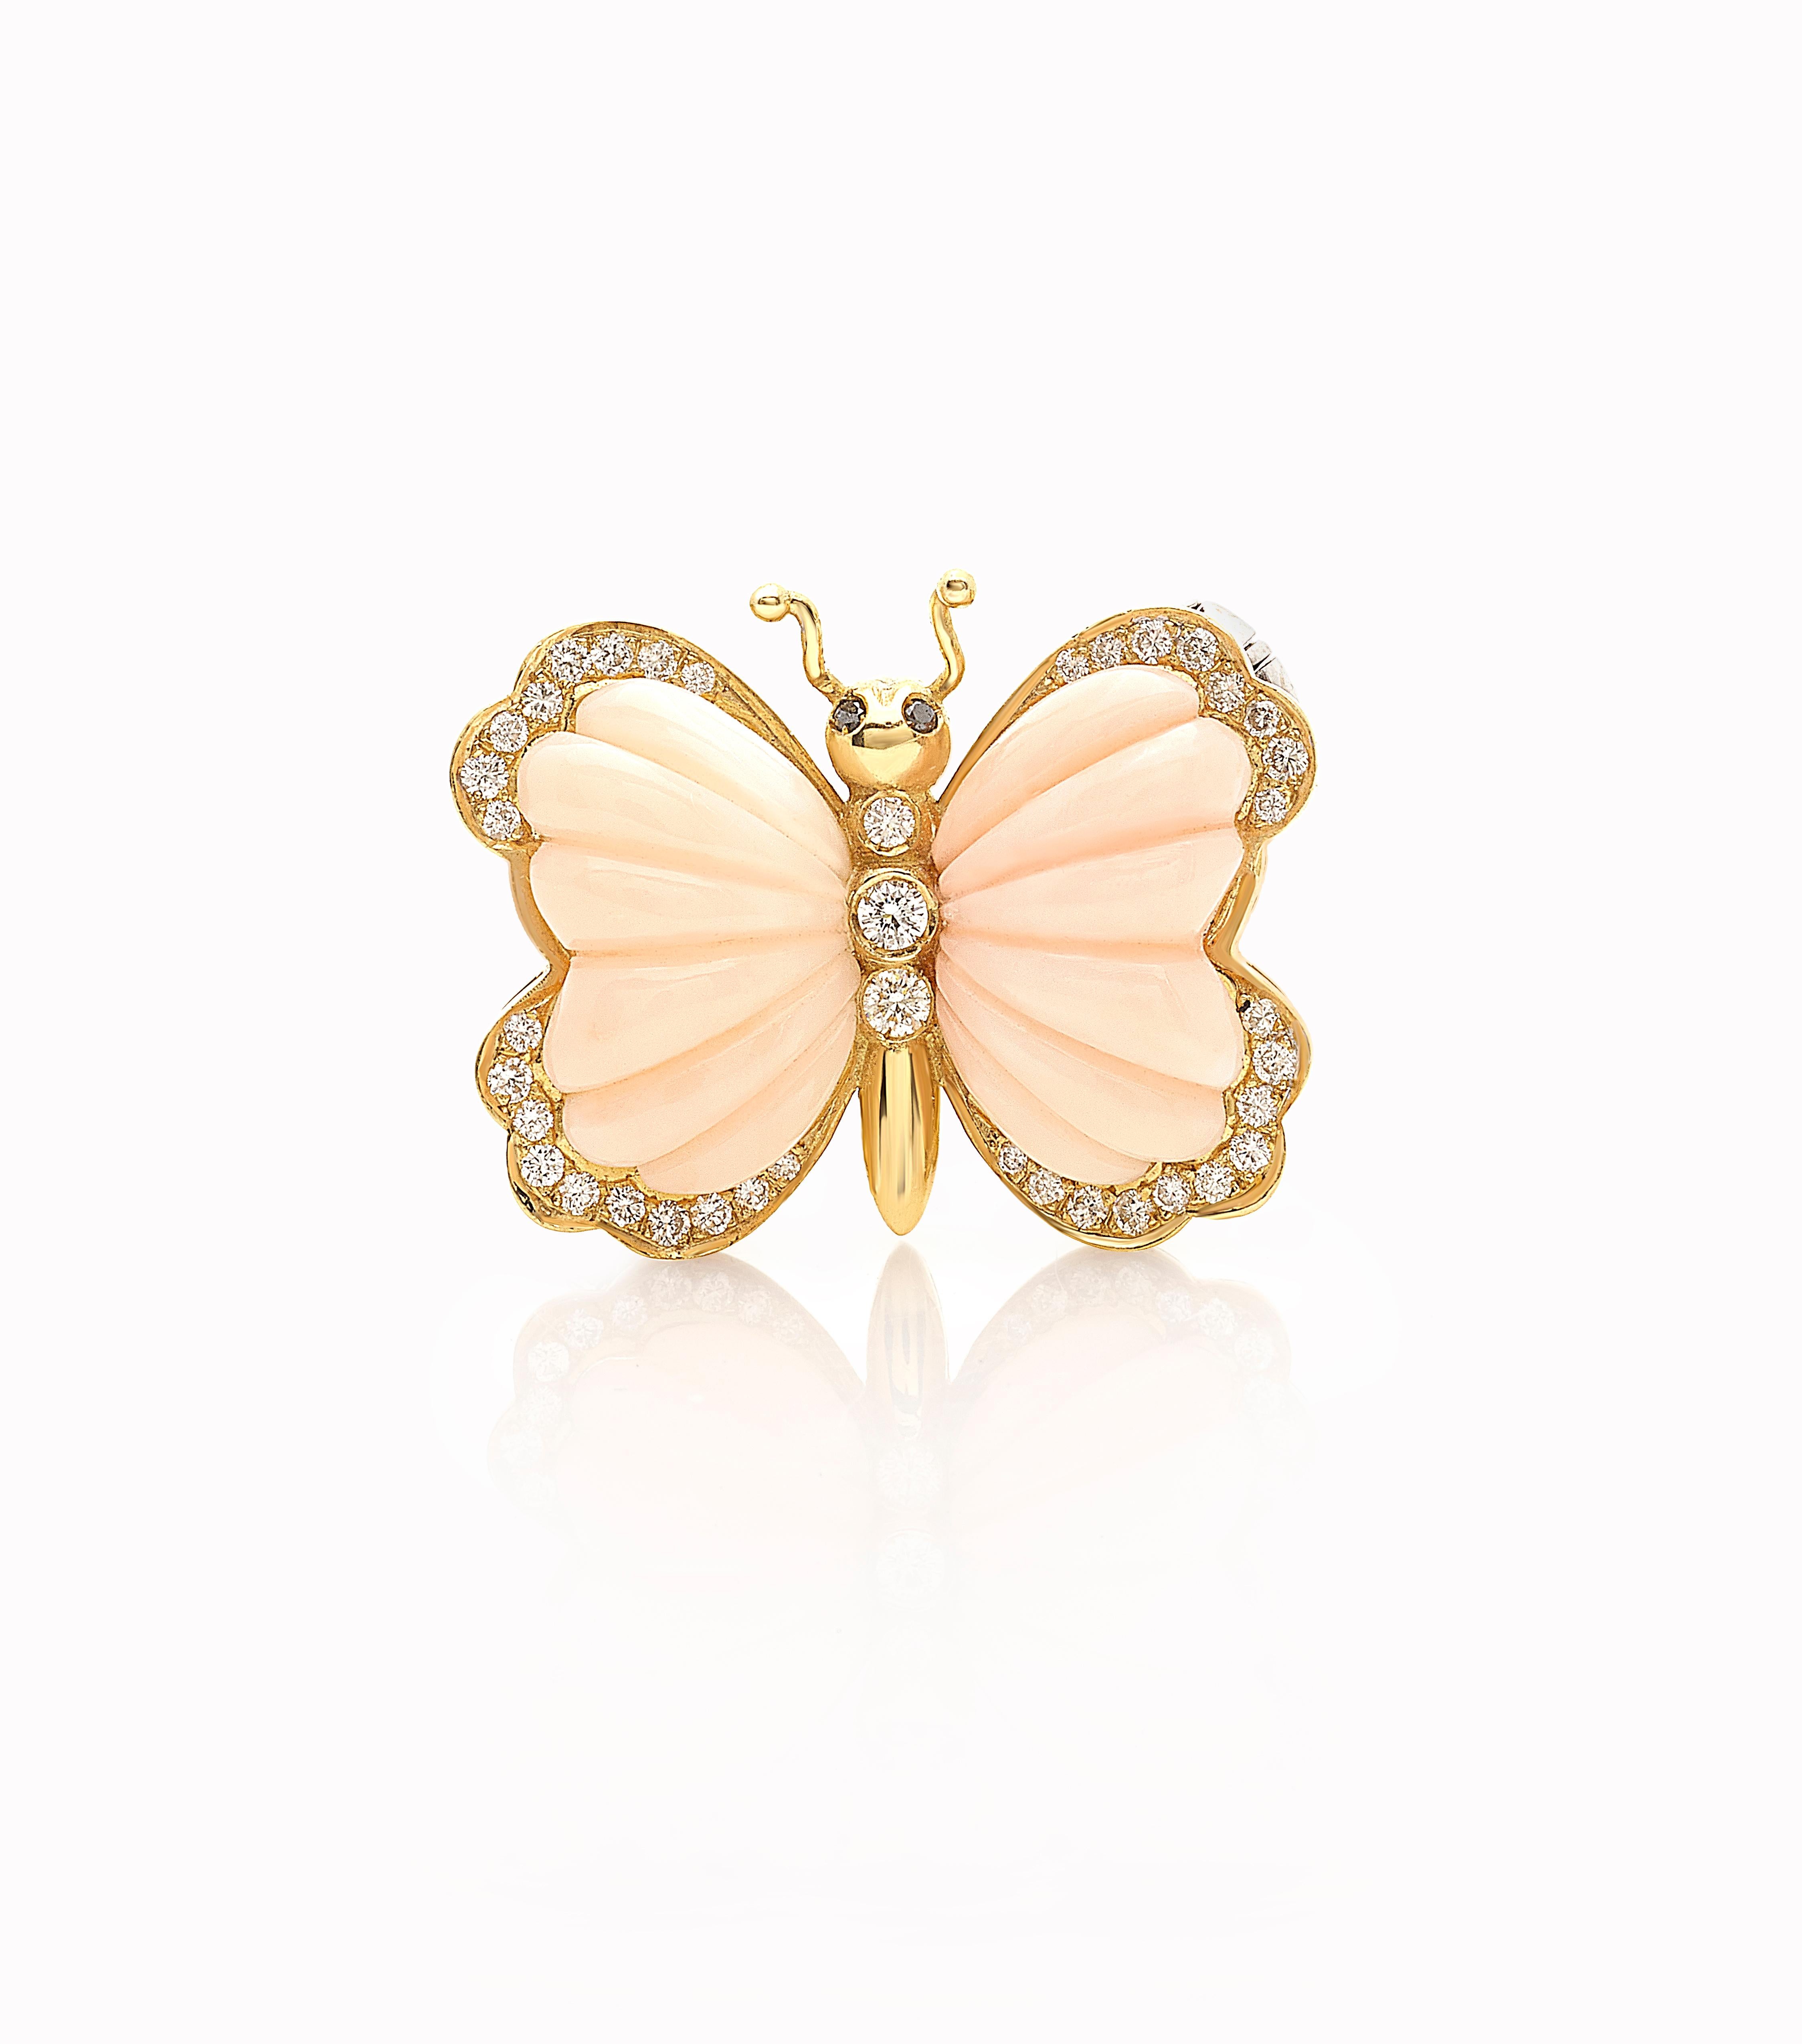 A unique-piece Butterfly brooch handcrafted in Italy by Neapolitan artisan .
The power of the item is also related to a unique Pink coral stonecut and black diamonds in the eyes. 
The brooch is made in yellow 18kt gold.

